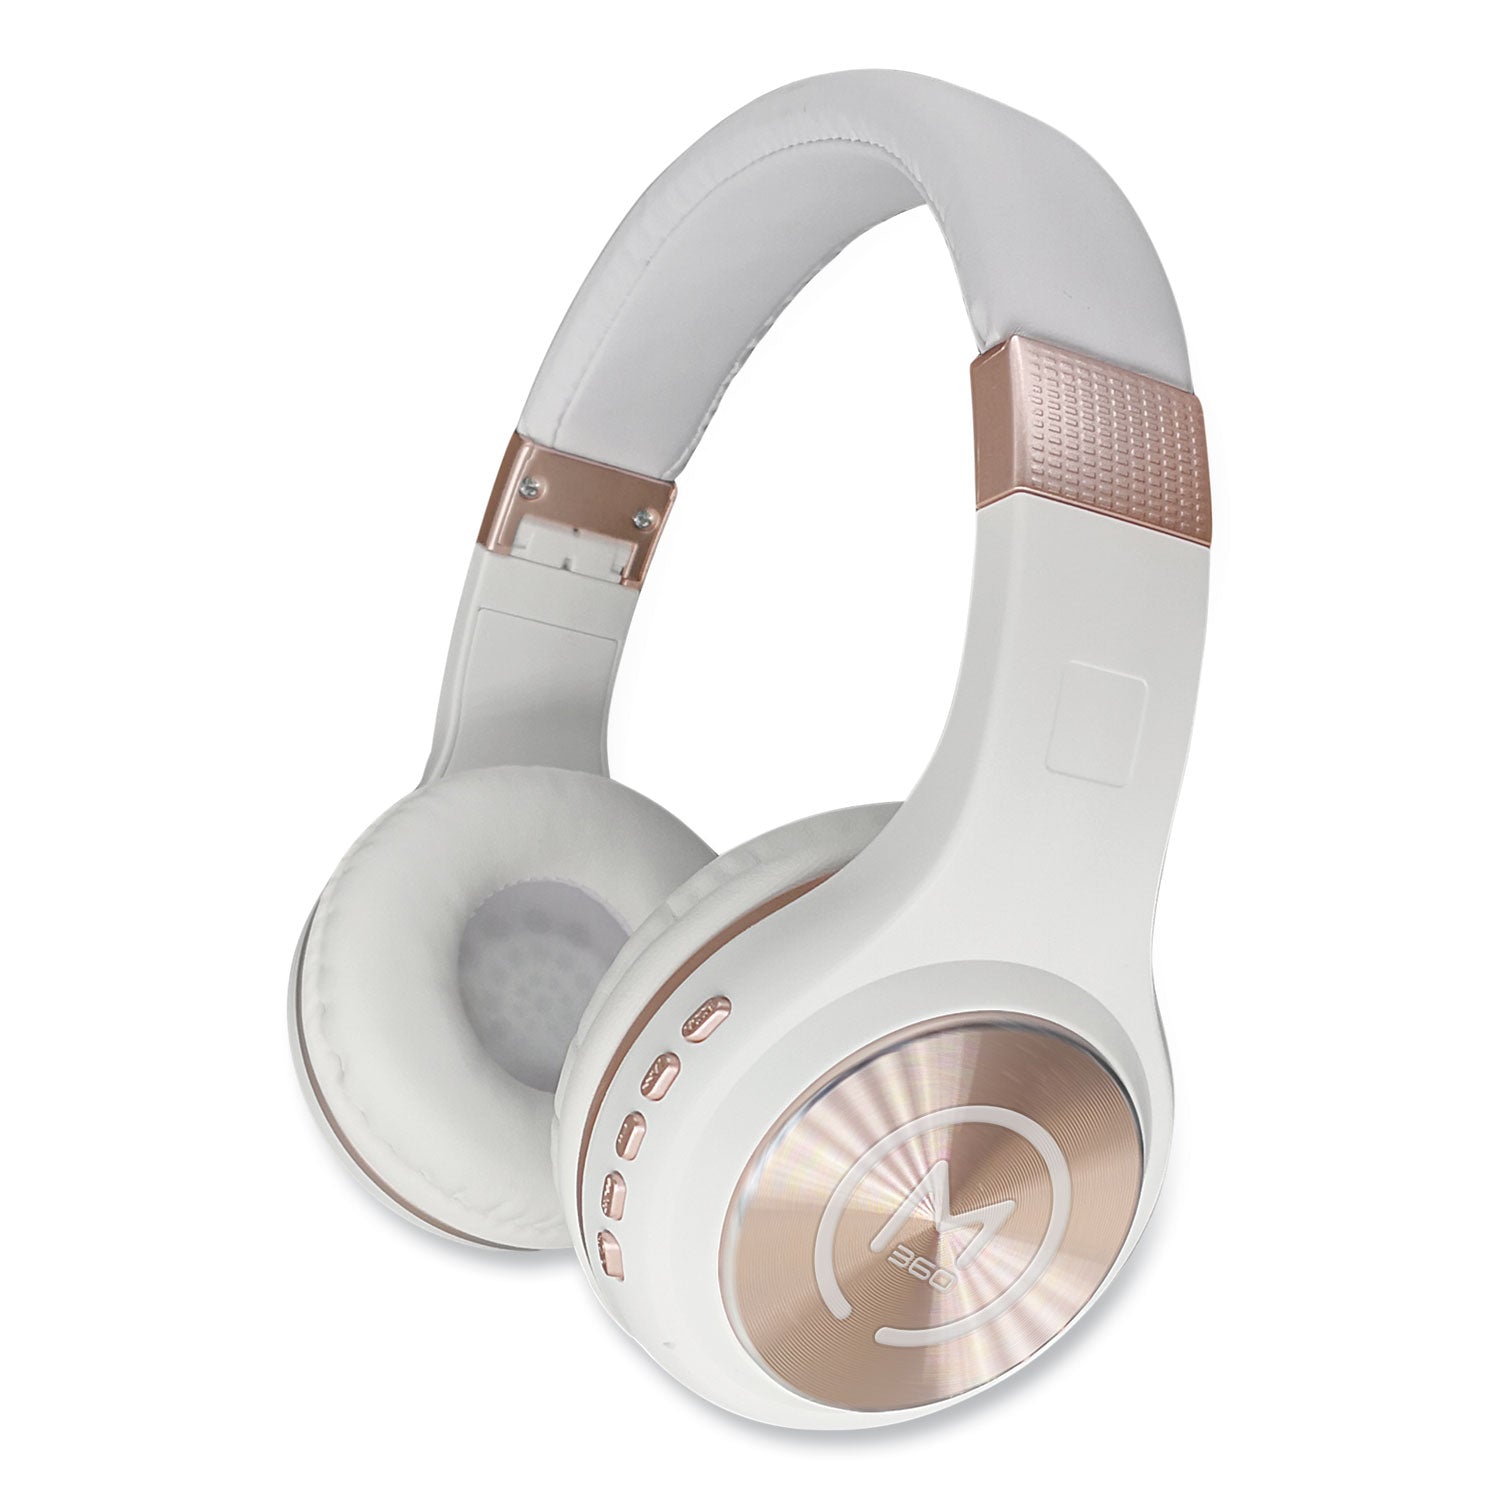 serenity-stereo-wireless-headphones-with-microphone-3-ft-cord-white-rose-gold_mhshp5500r - 1